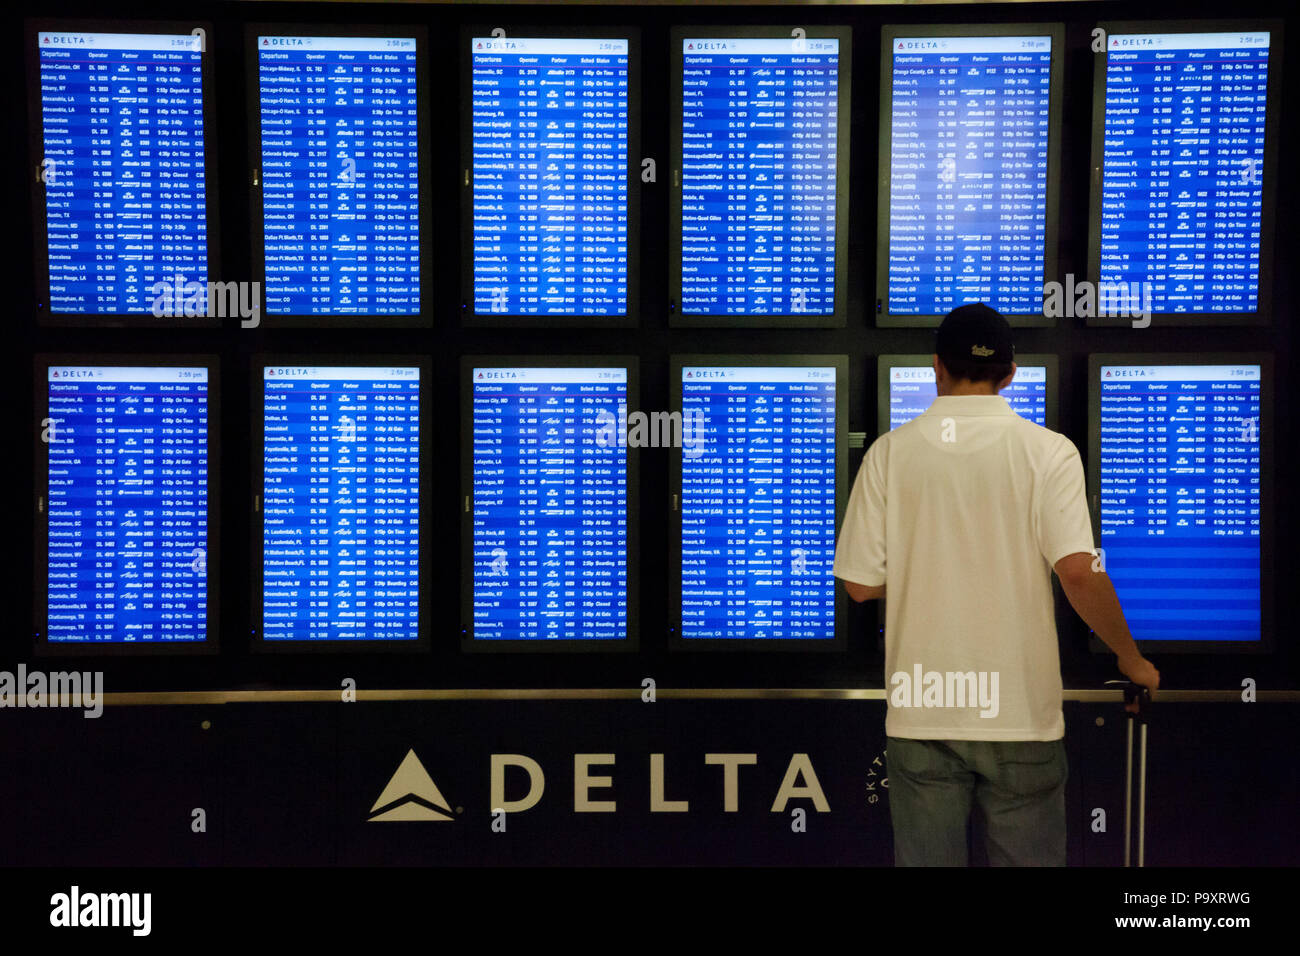 A passenger stands near the flight information panel depicting services of Delta Airlines and its partners at Atlanta International Airport, USA Stock Photo